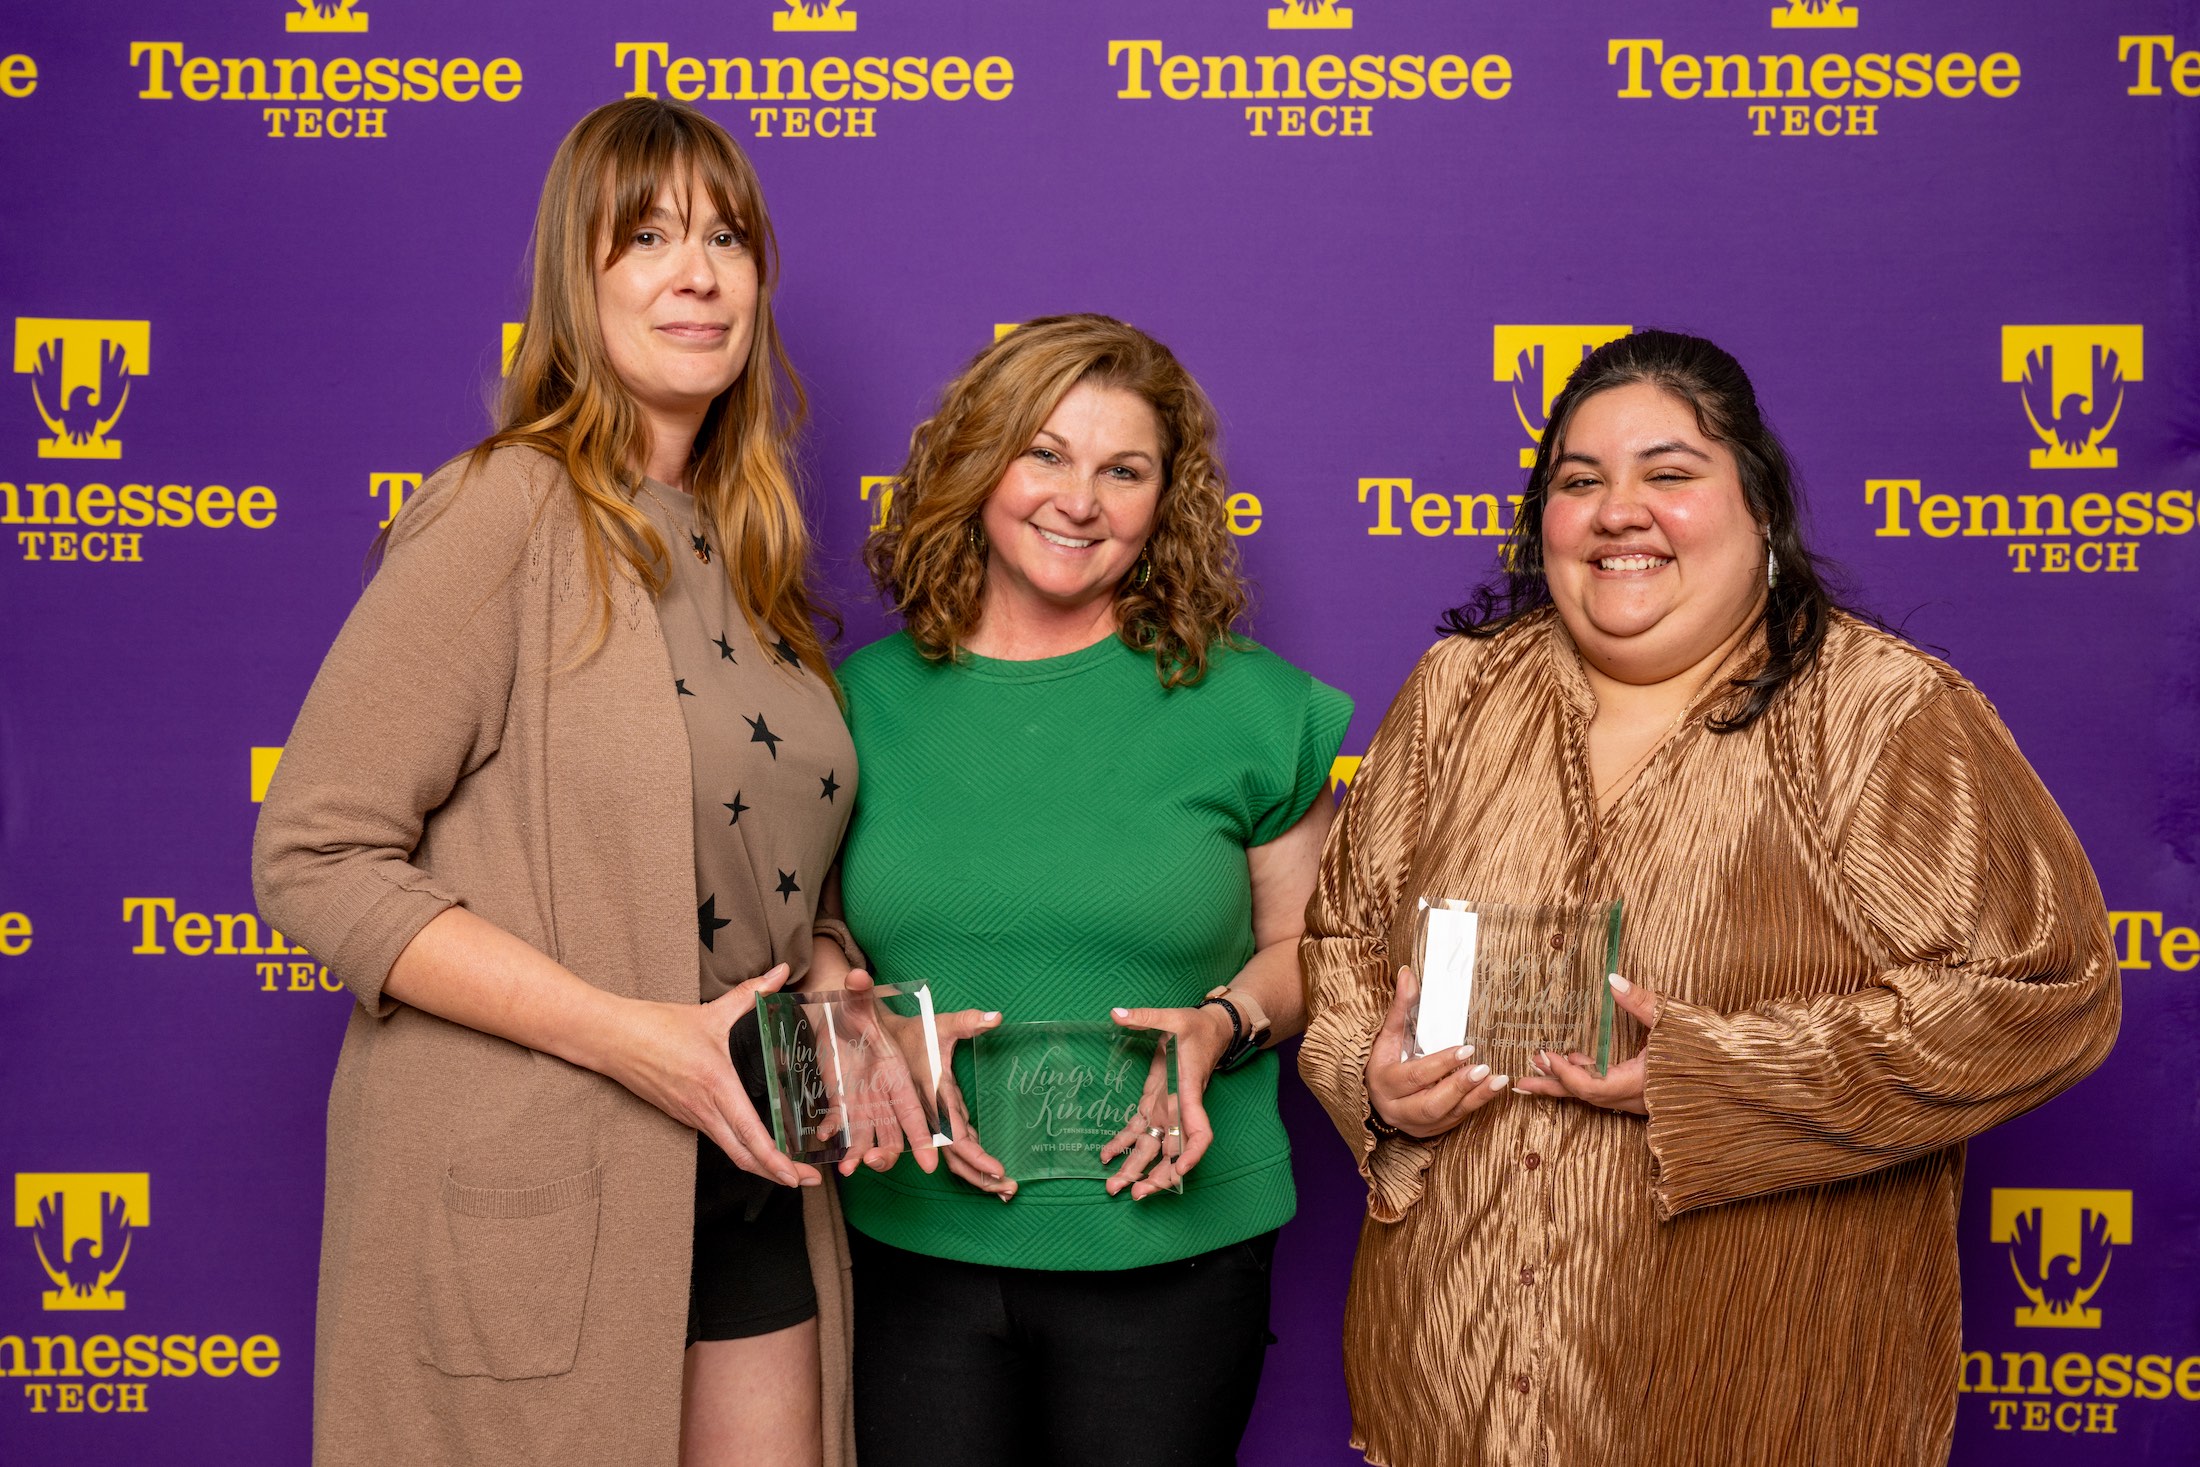 Jessie Medley, Angie Smith and Jessica Vazquez were honored at Tennessee Tech's annual Celebration of Excellence with Wings of Kindness awards for their work in the university's Child Development Lab.